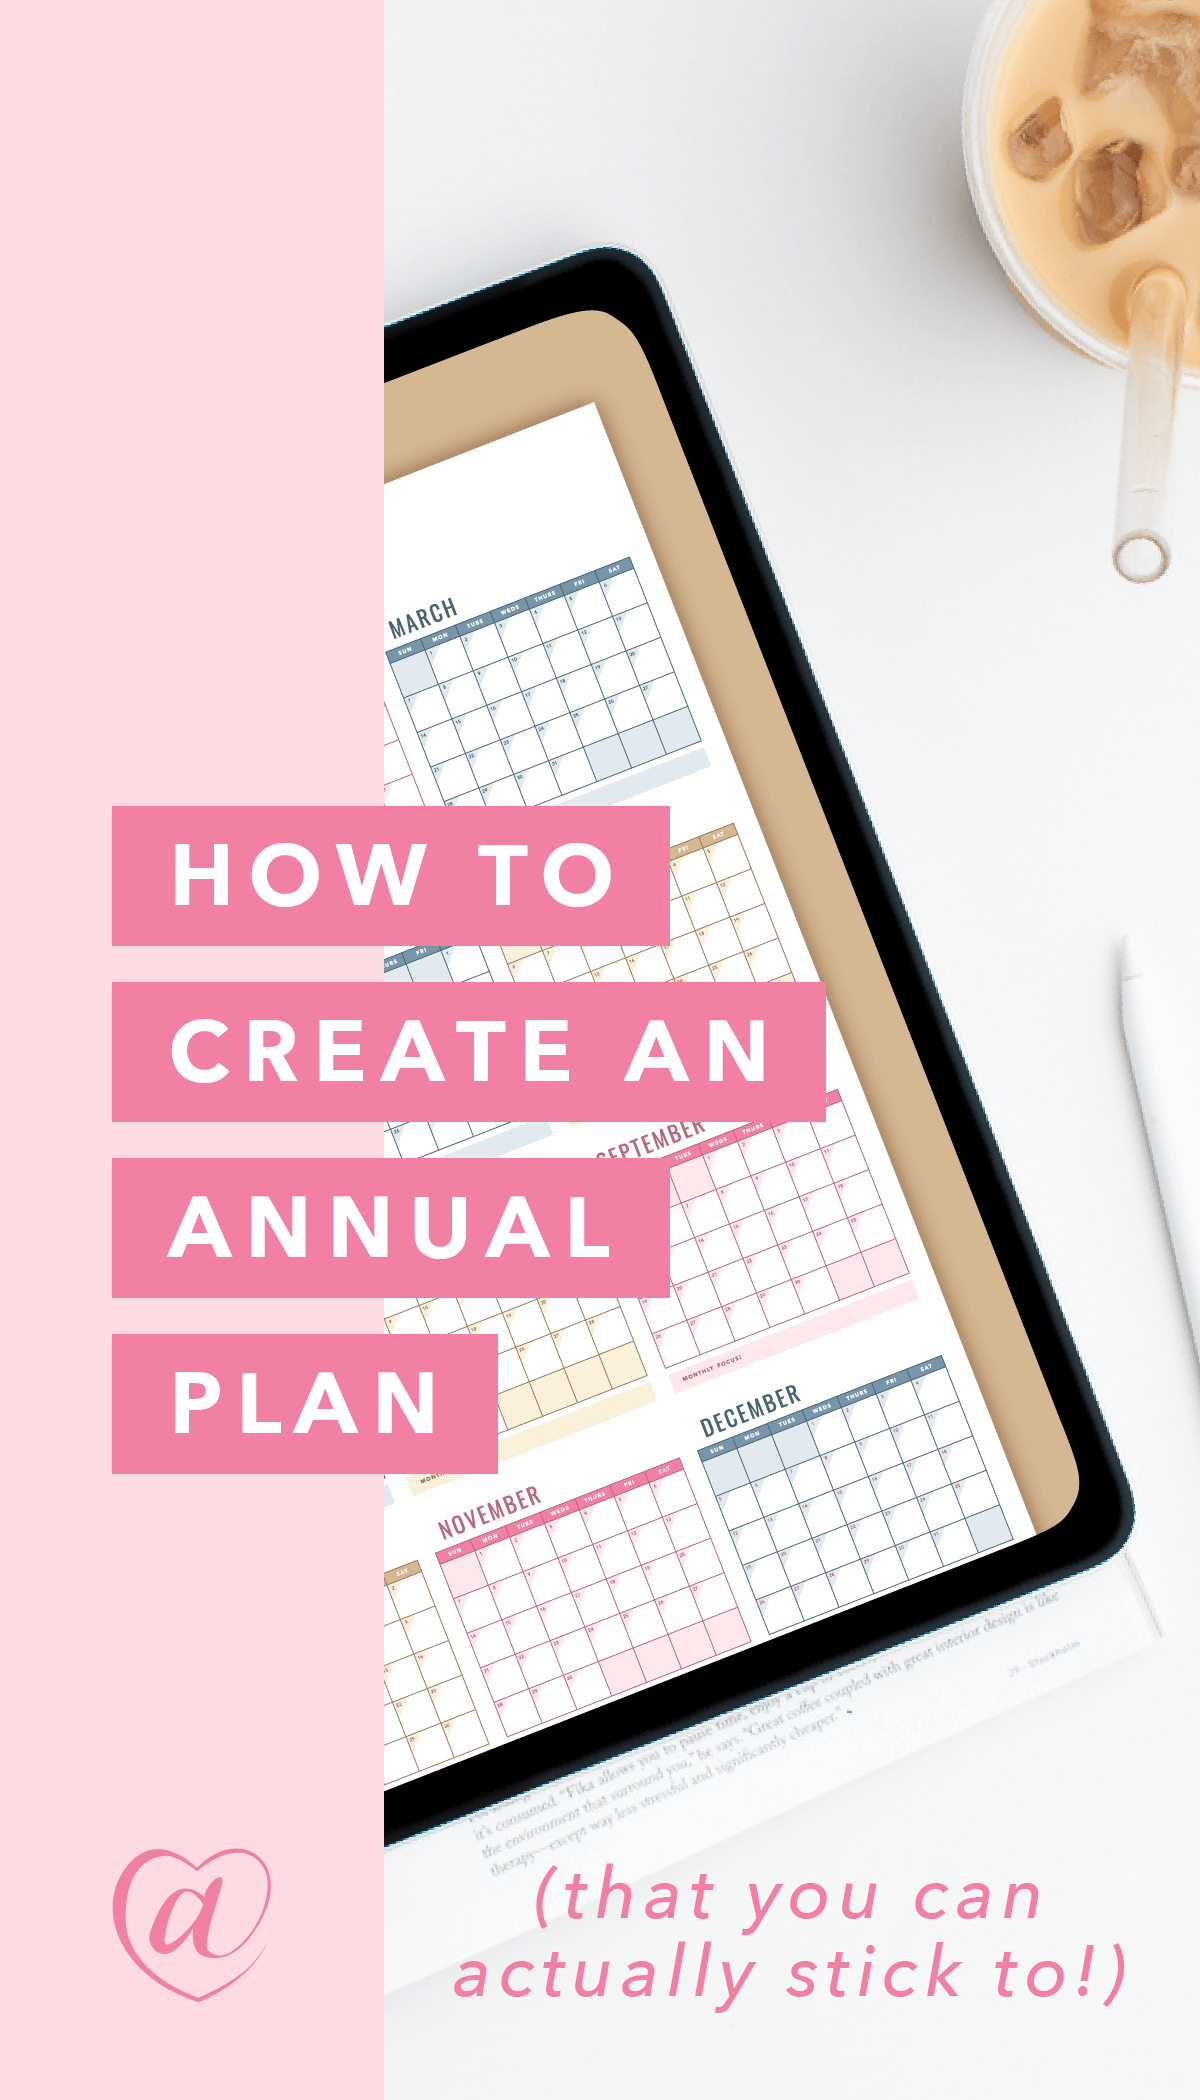  How to Create a 2021 Annual Plan (that you can actually stick to!)  // Creative at Heart #quarterlyplanning #endofyear #printablecalendar #2020 #2021